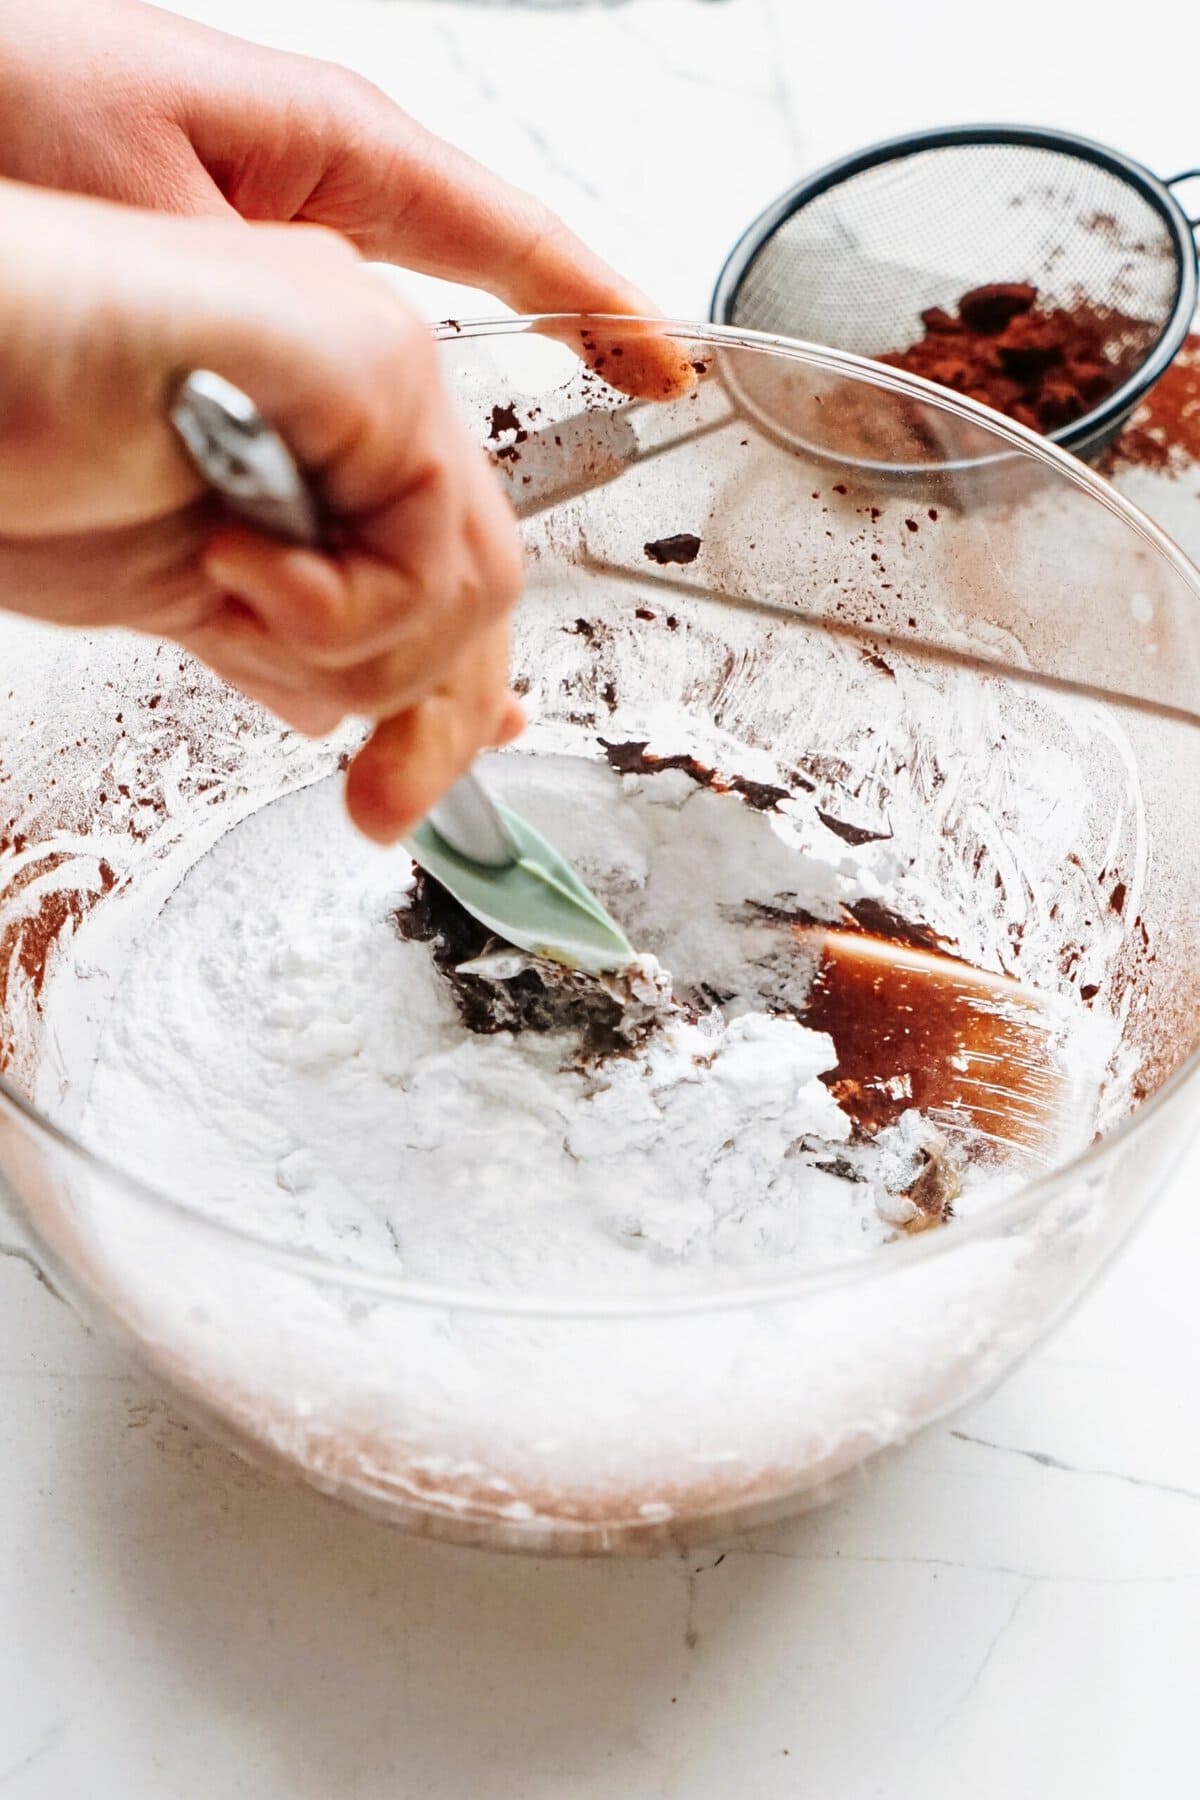 A person mixing ingredients in a glass bowl.